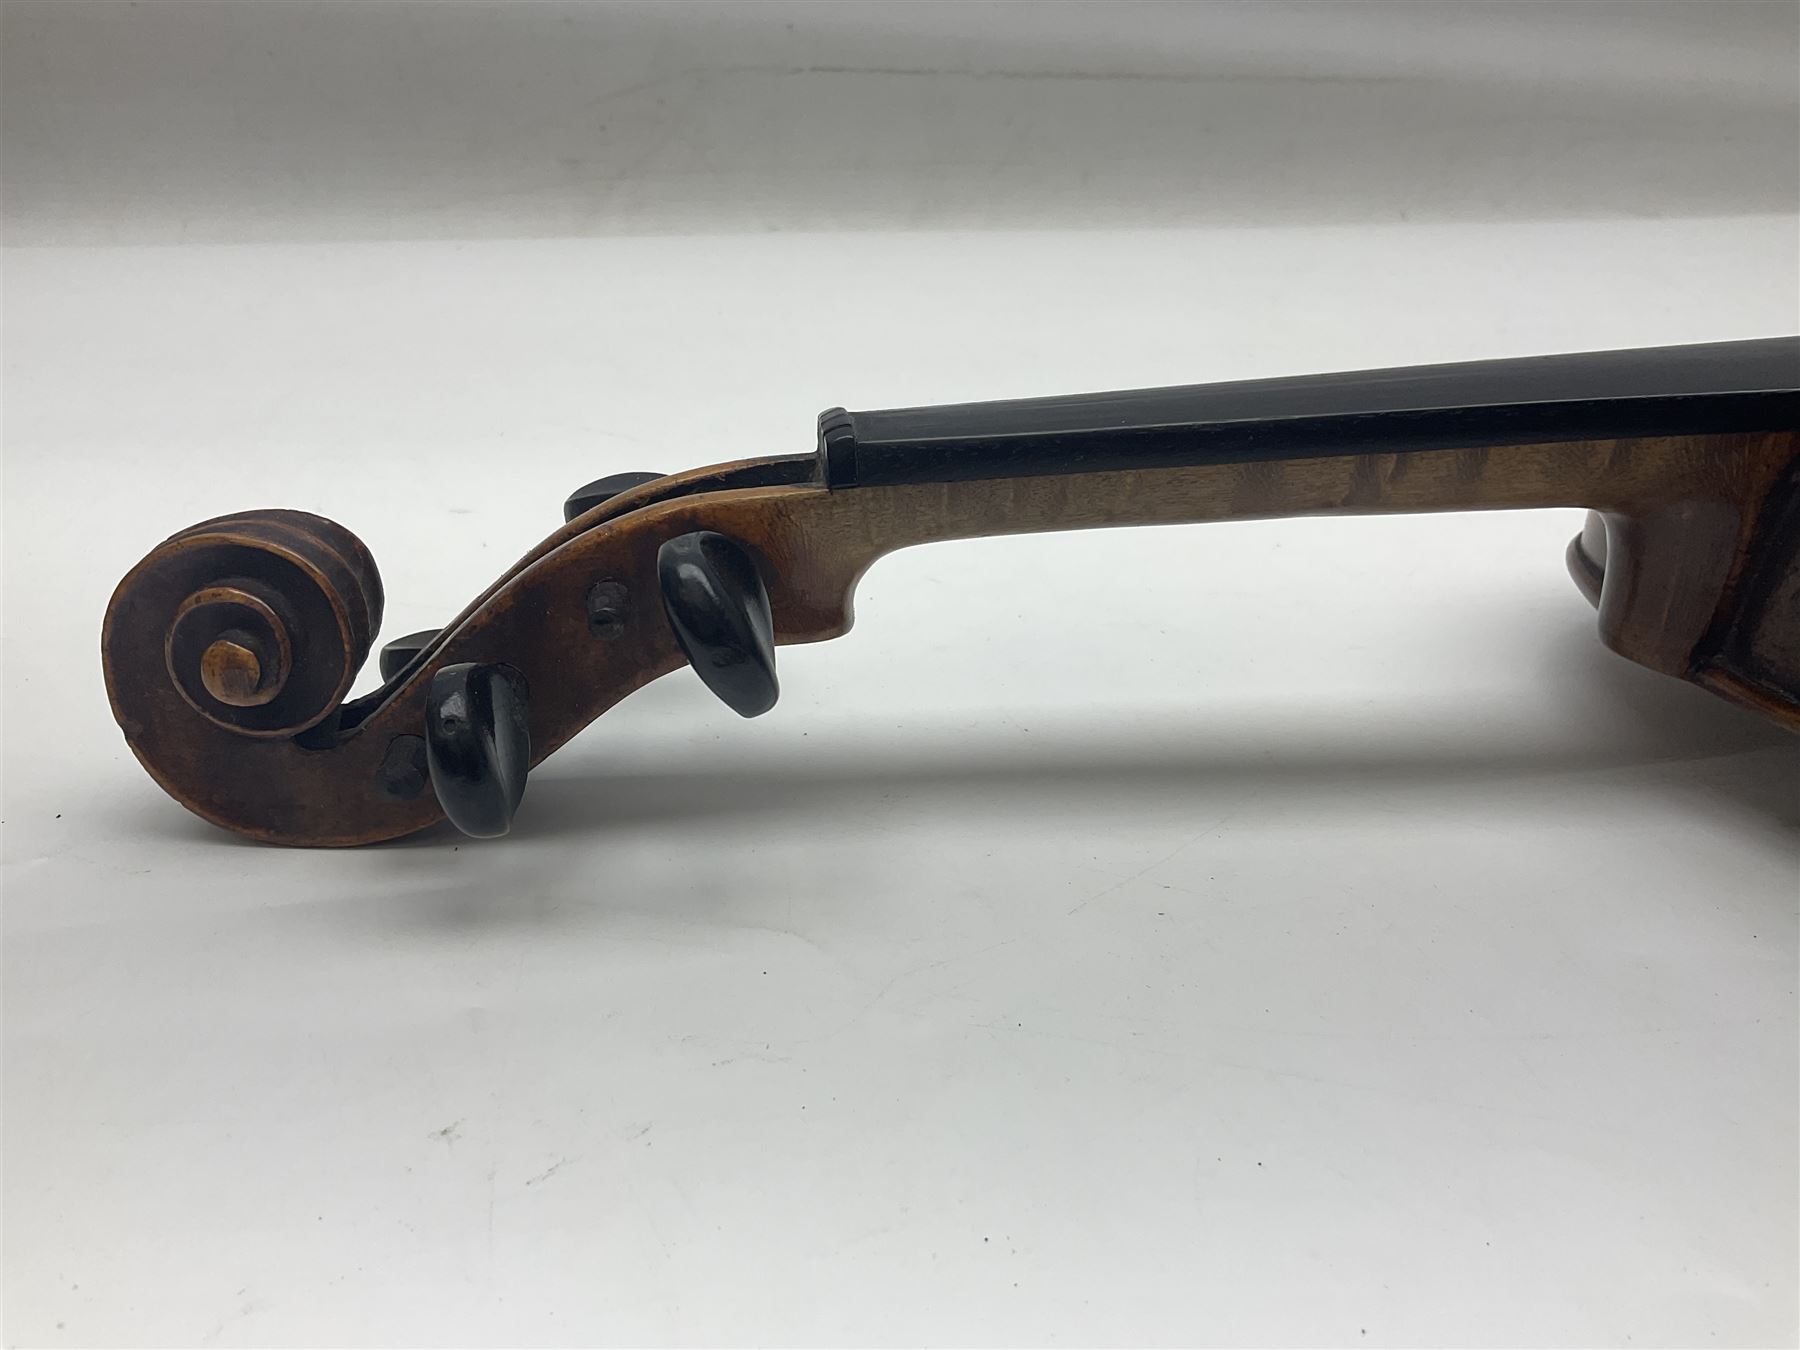 Late 19th century German trade violin c1890 with 36cm two-piece birds-eye maple back - Image 10 of 17